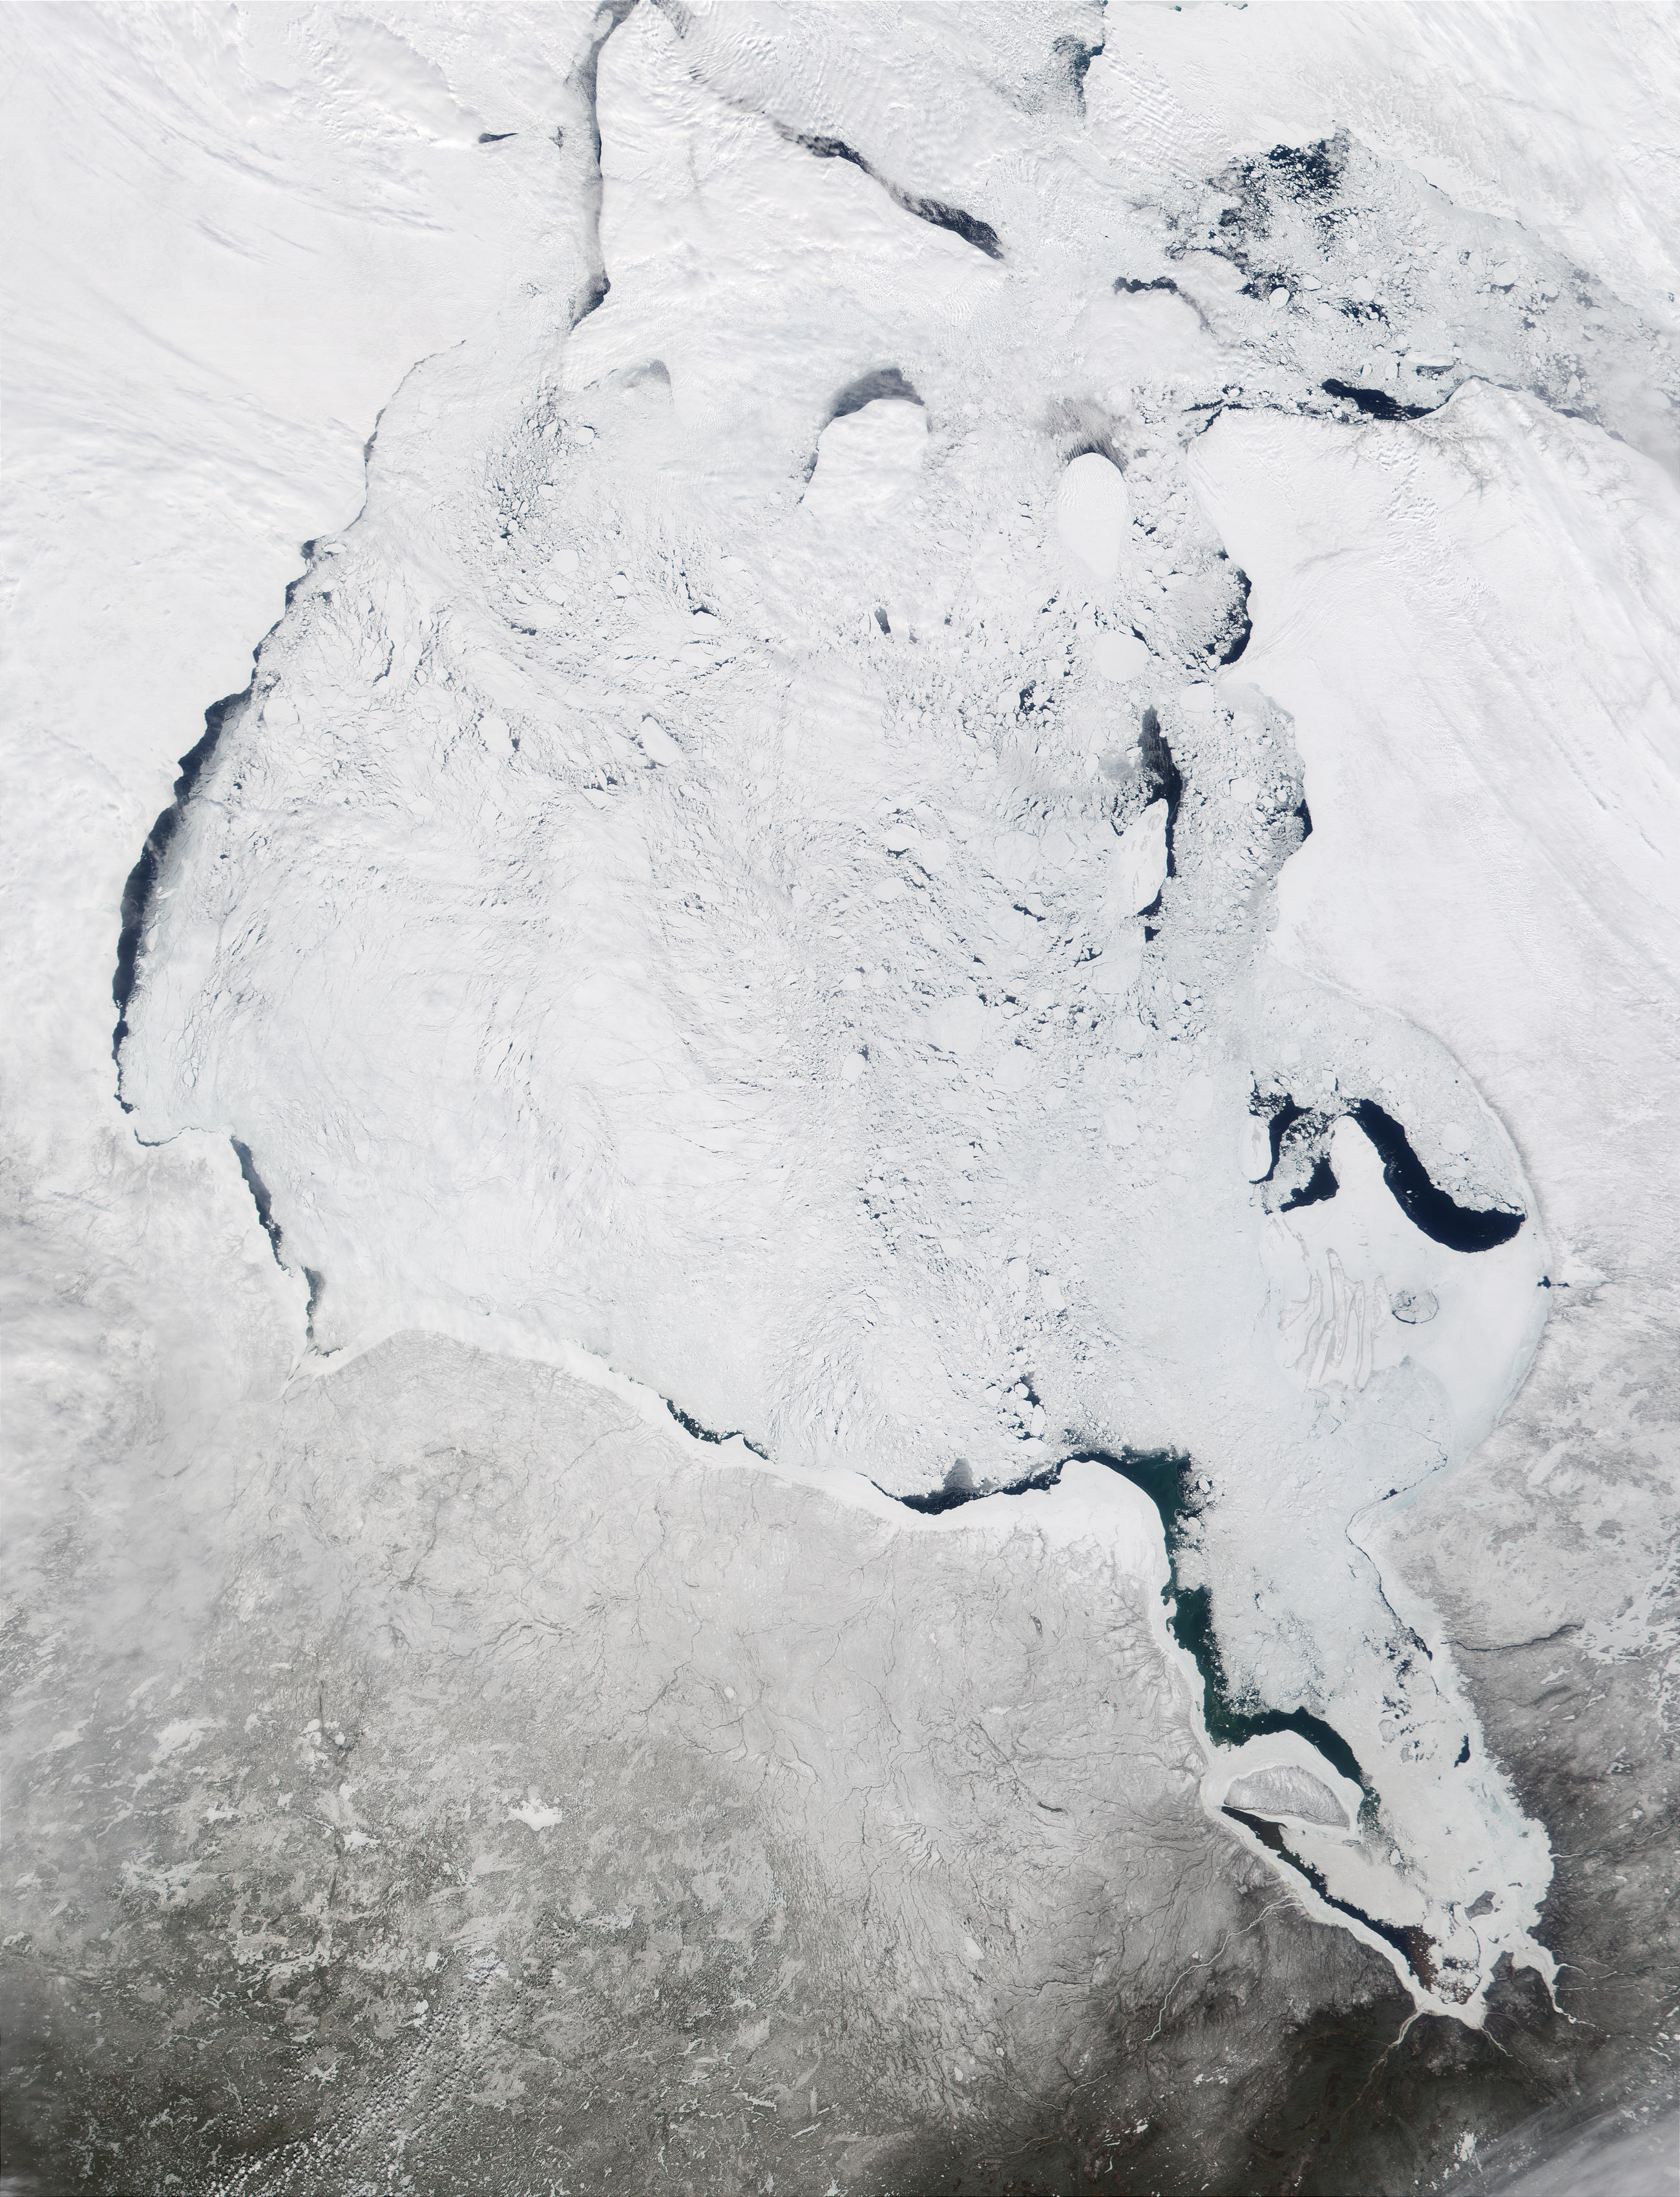 Hudson Bay, Canada - related image preview